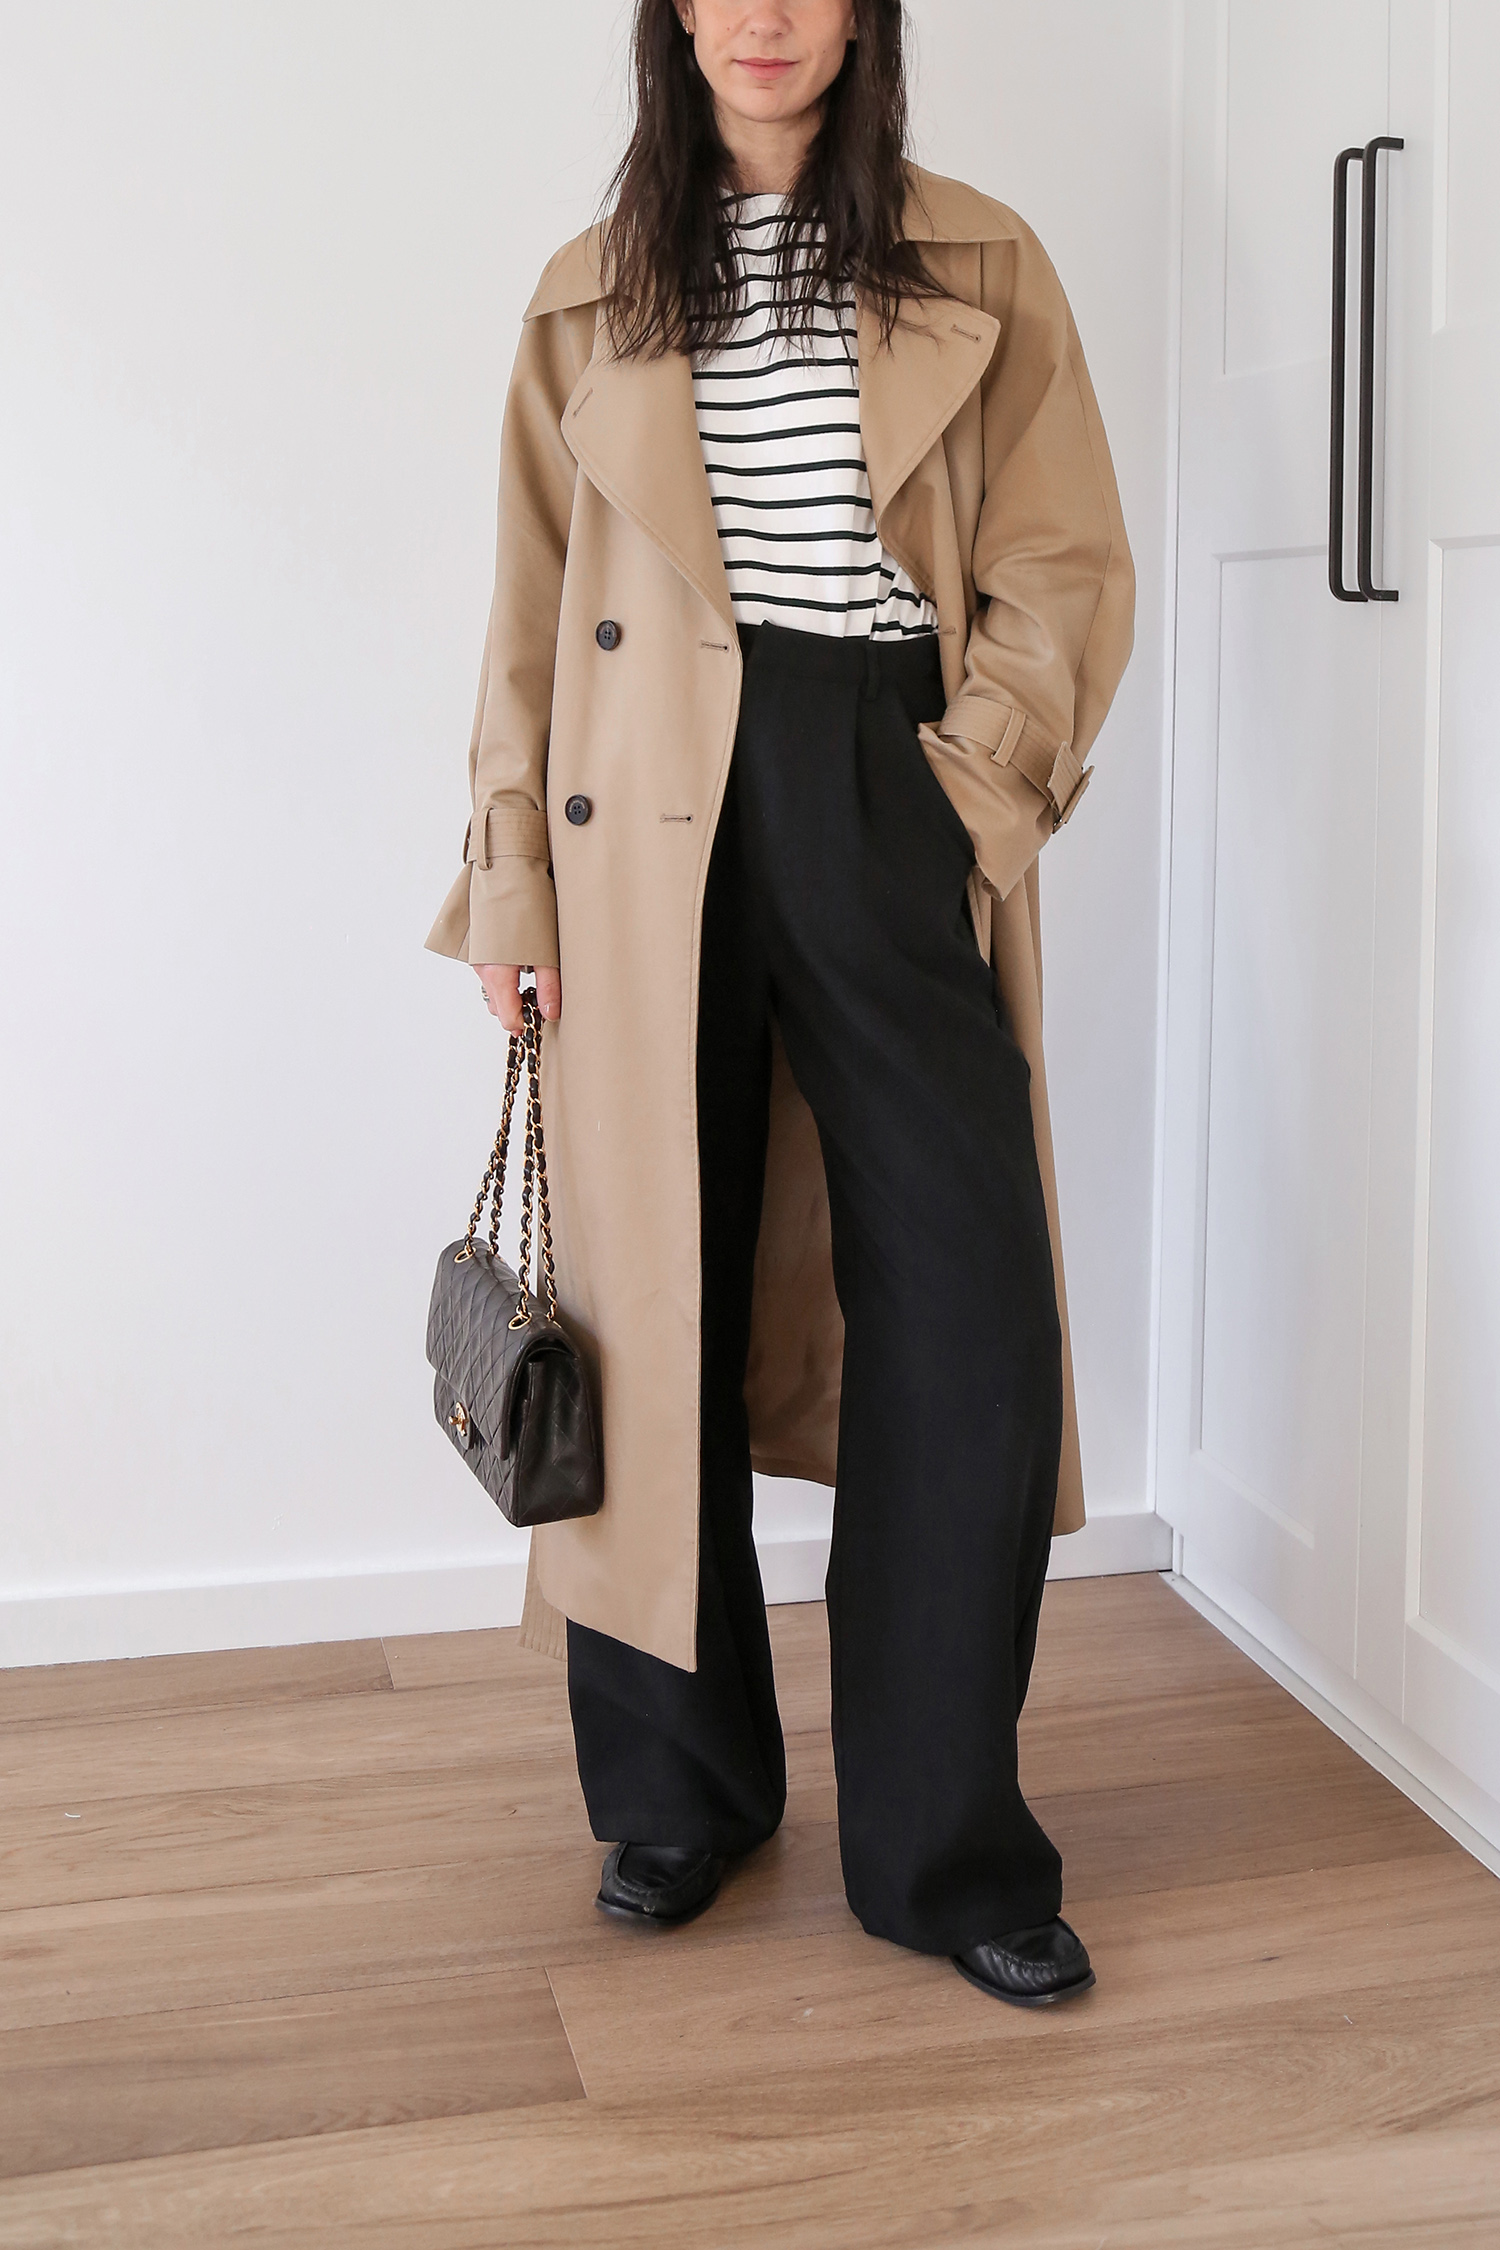 Classic Parisian chic style with stripe top and DISSH black rowan pants